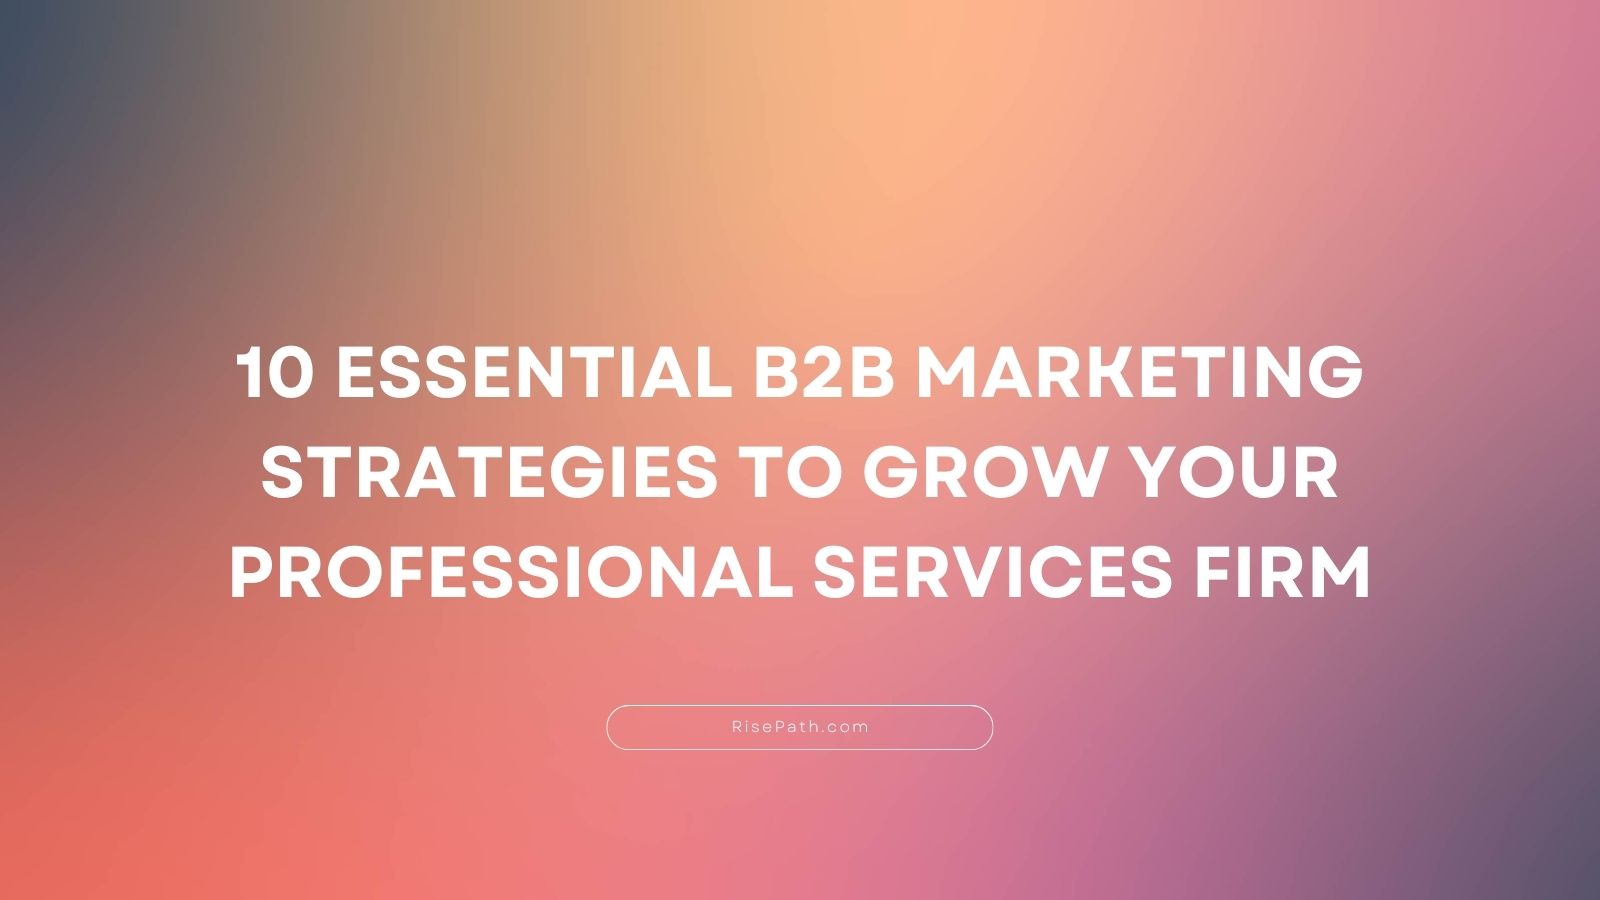 10 Essential B2B Marketing Strategies to Grow Your Professional Services Firms